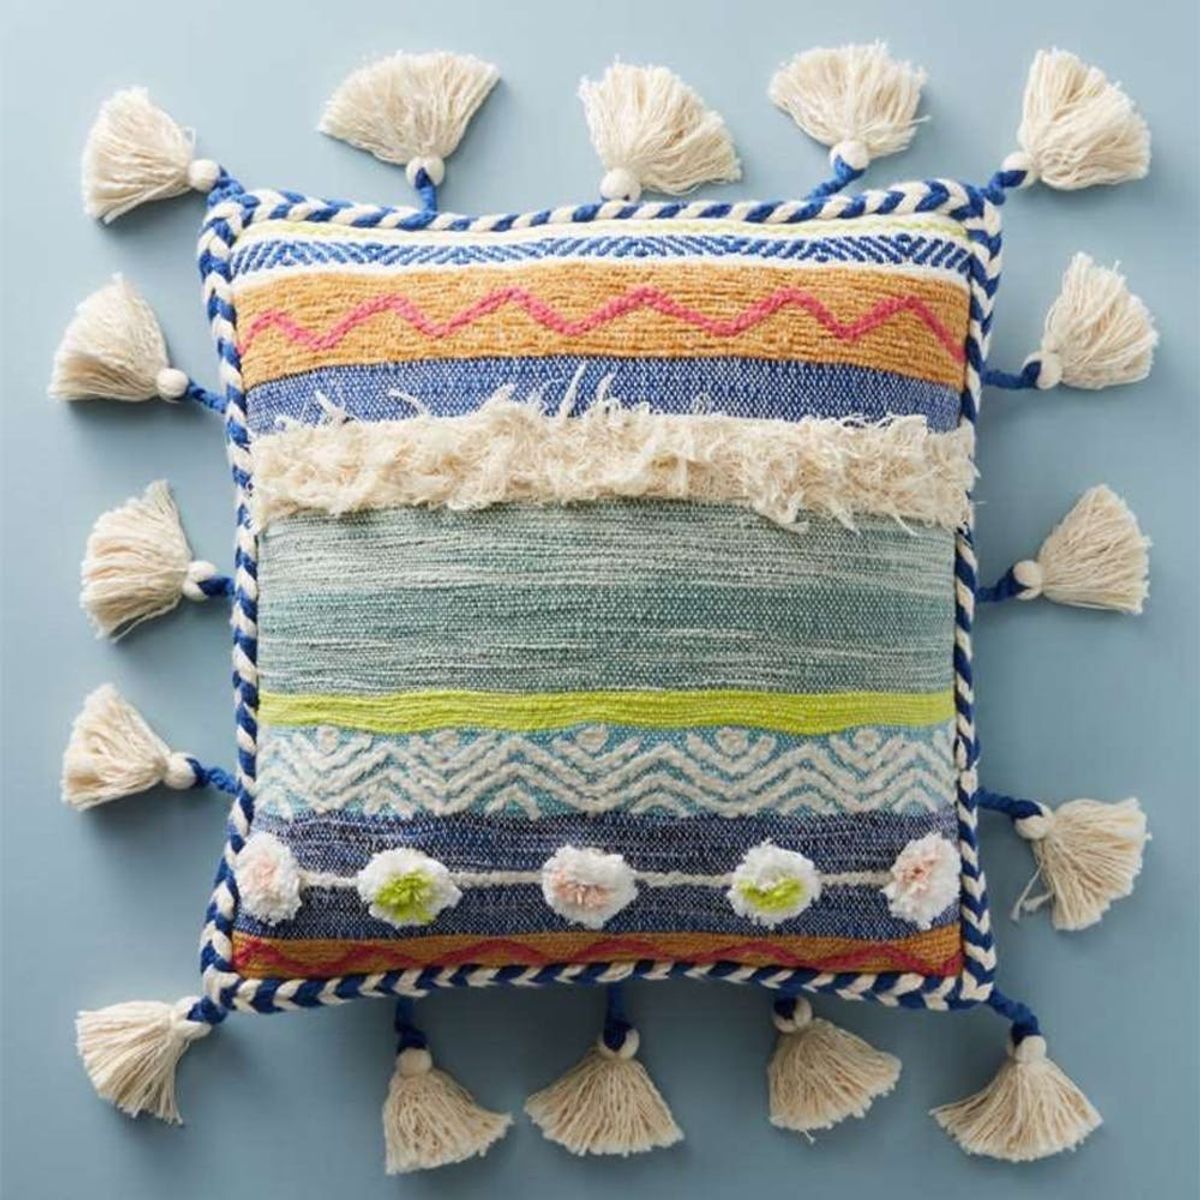 Anthropologie Home Just Launched at Nordstrom and We Love Everything